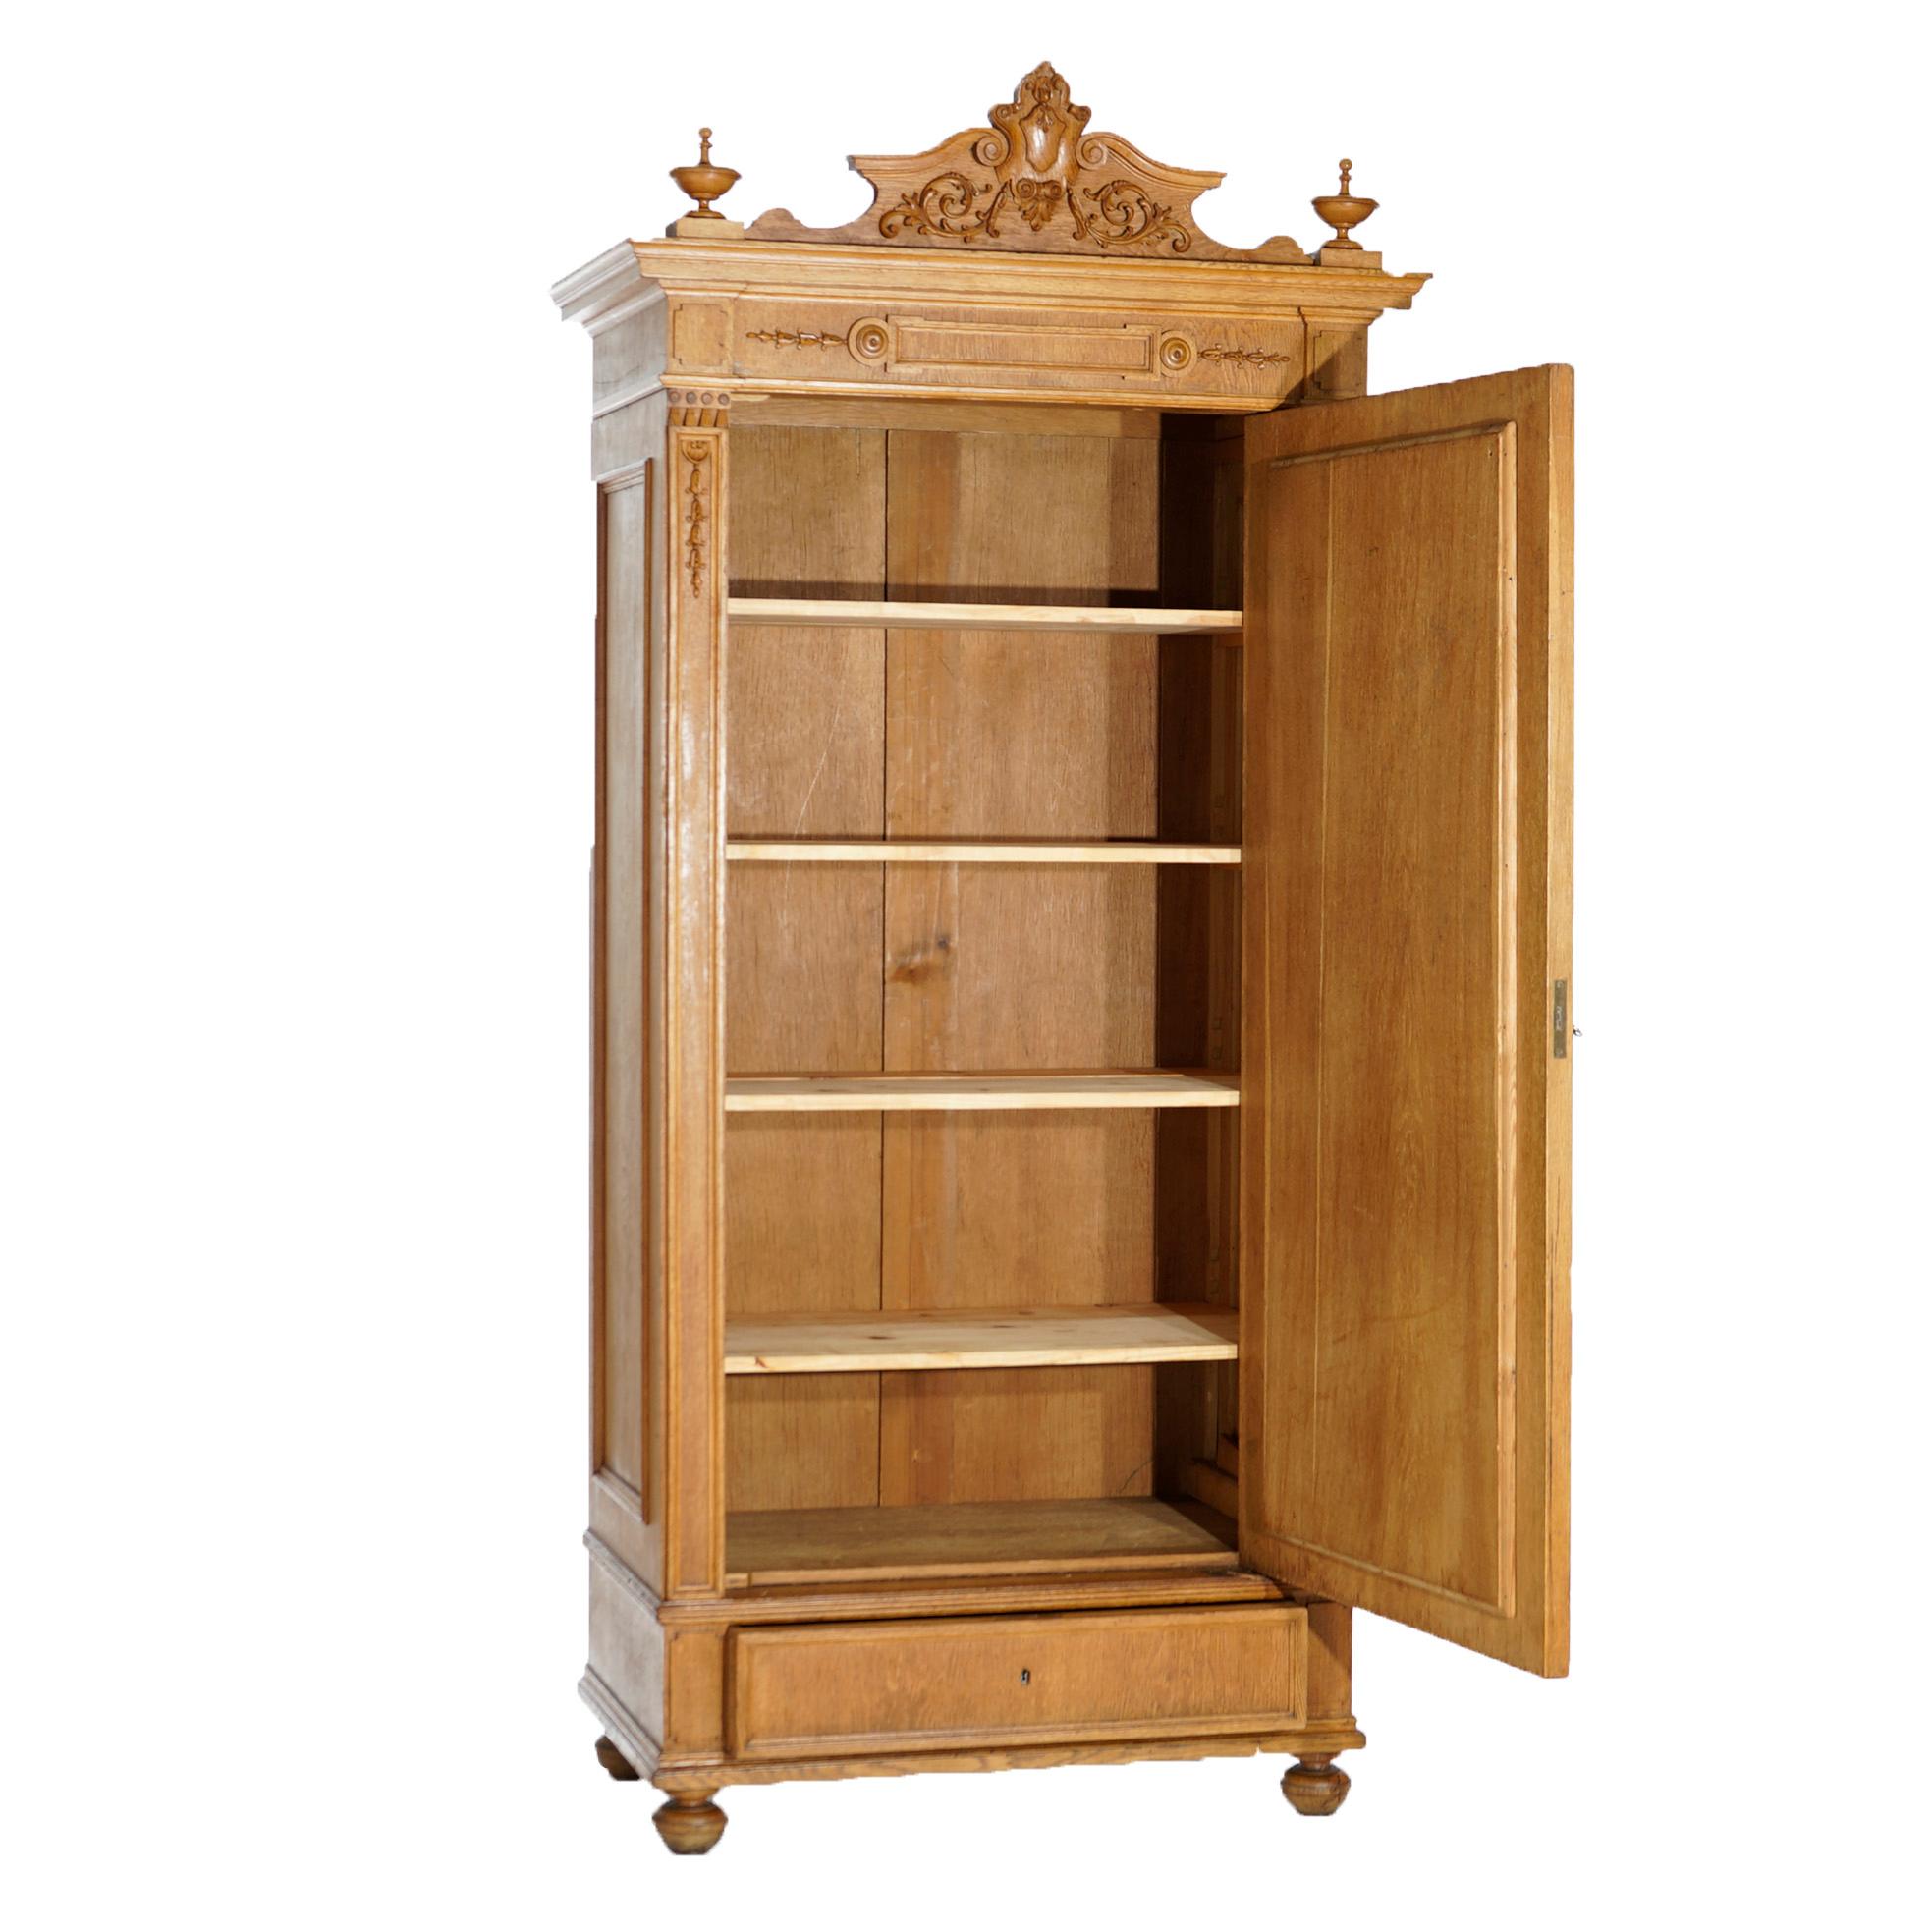 An antique English Edwardian armoire offers oak construction with carved crest having central shield and flanking foliate and scroll elements over case with single mirrored door opening to shelved interior over single long drawer, raised on